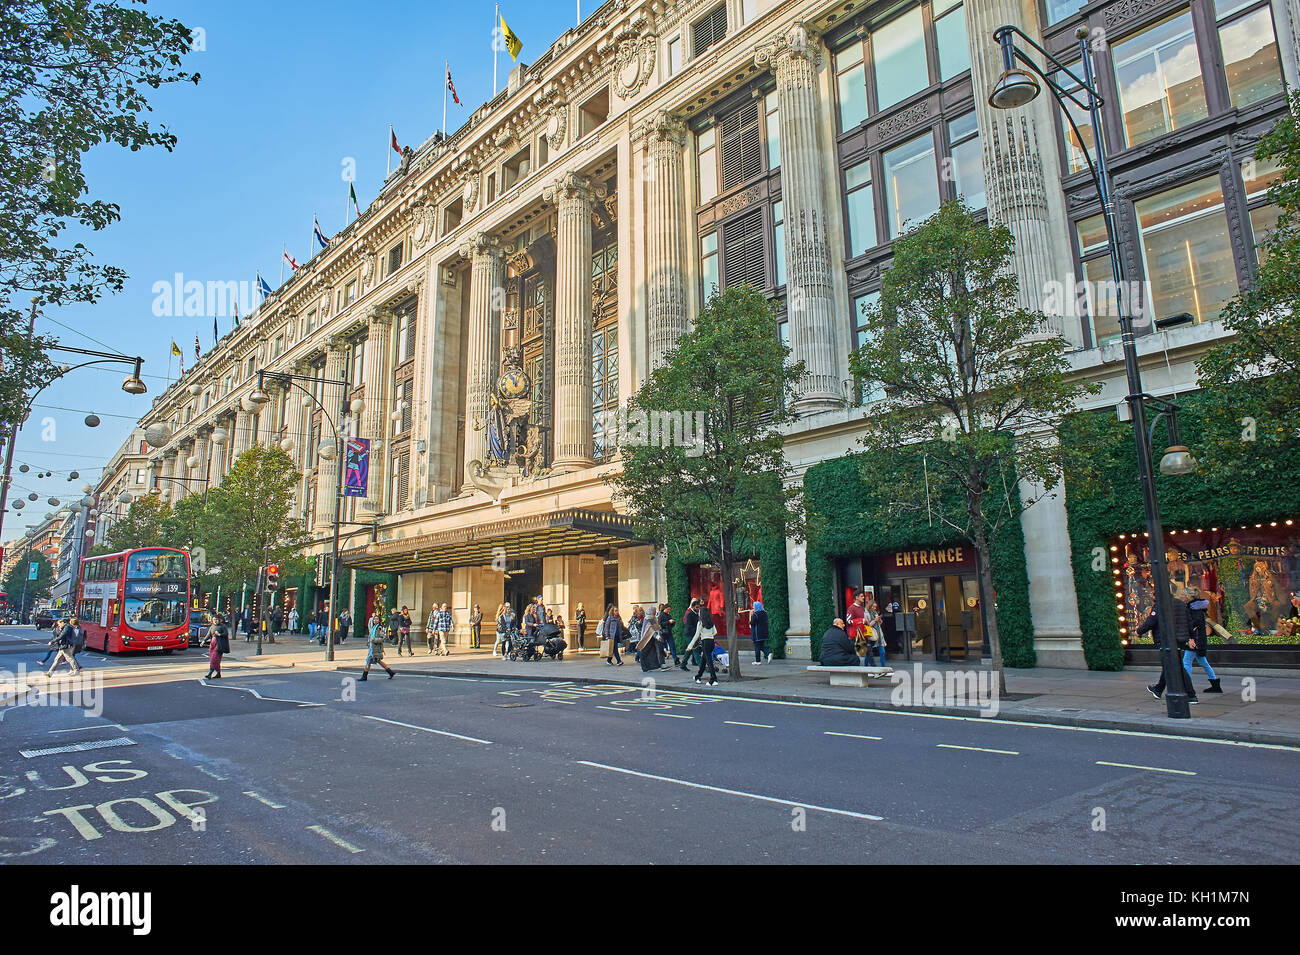 Selfridges department store is an iconic building on London's Oxford Street in the West End. Stock Photo